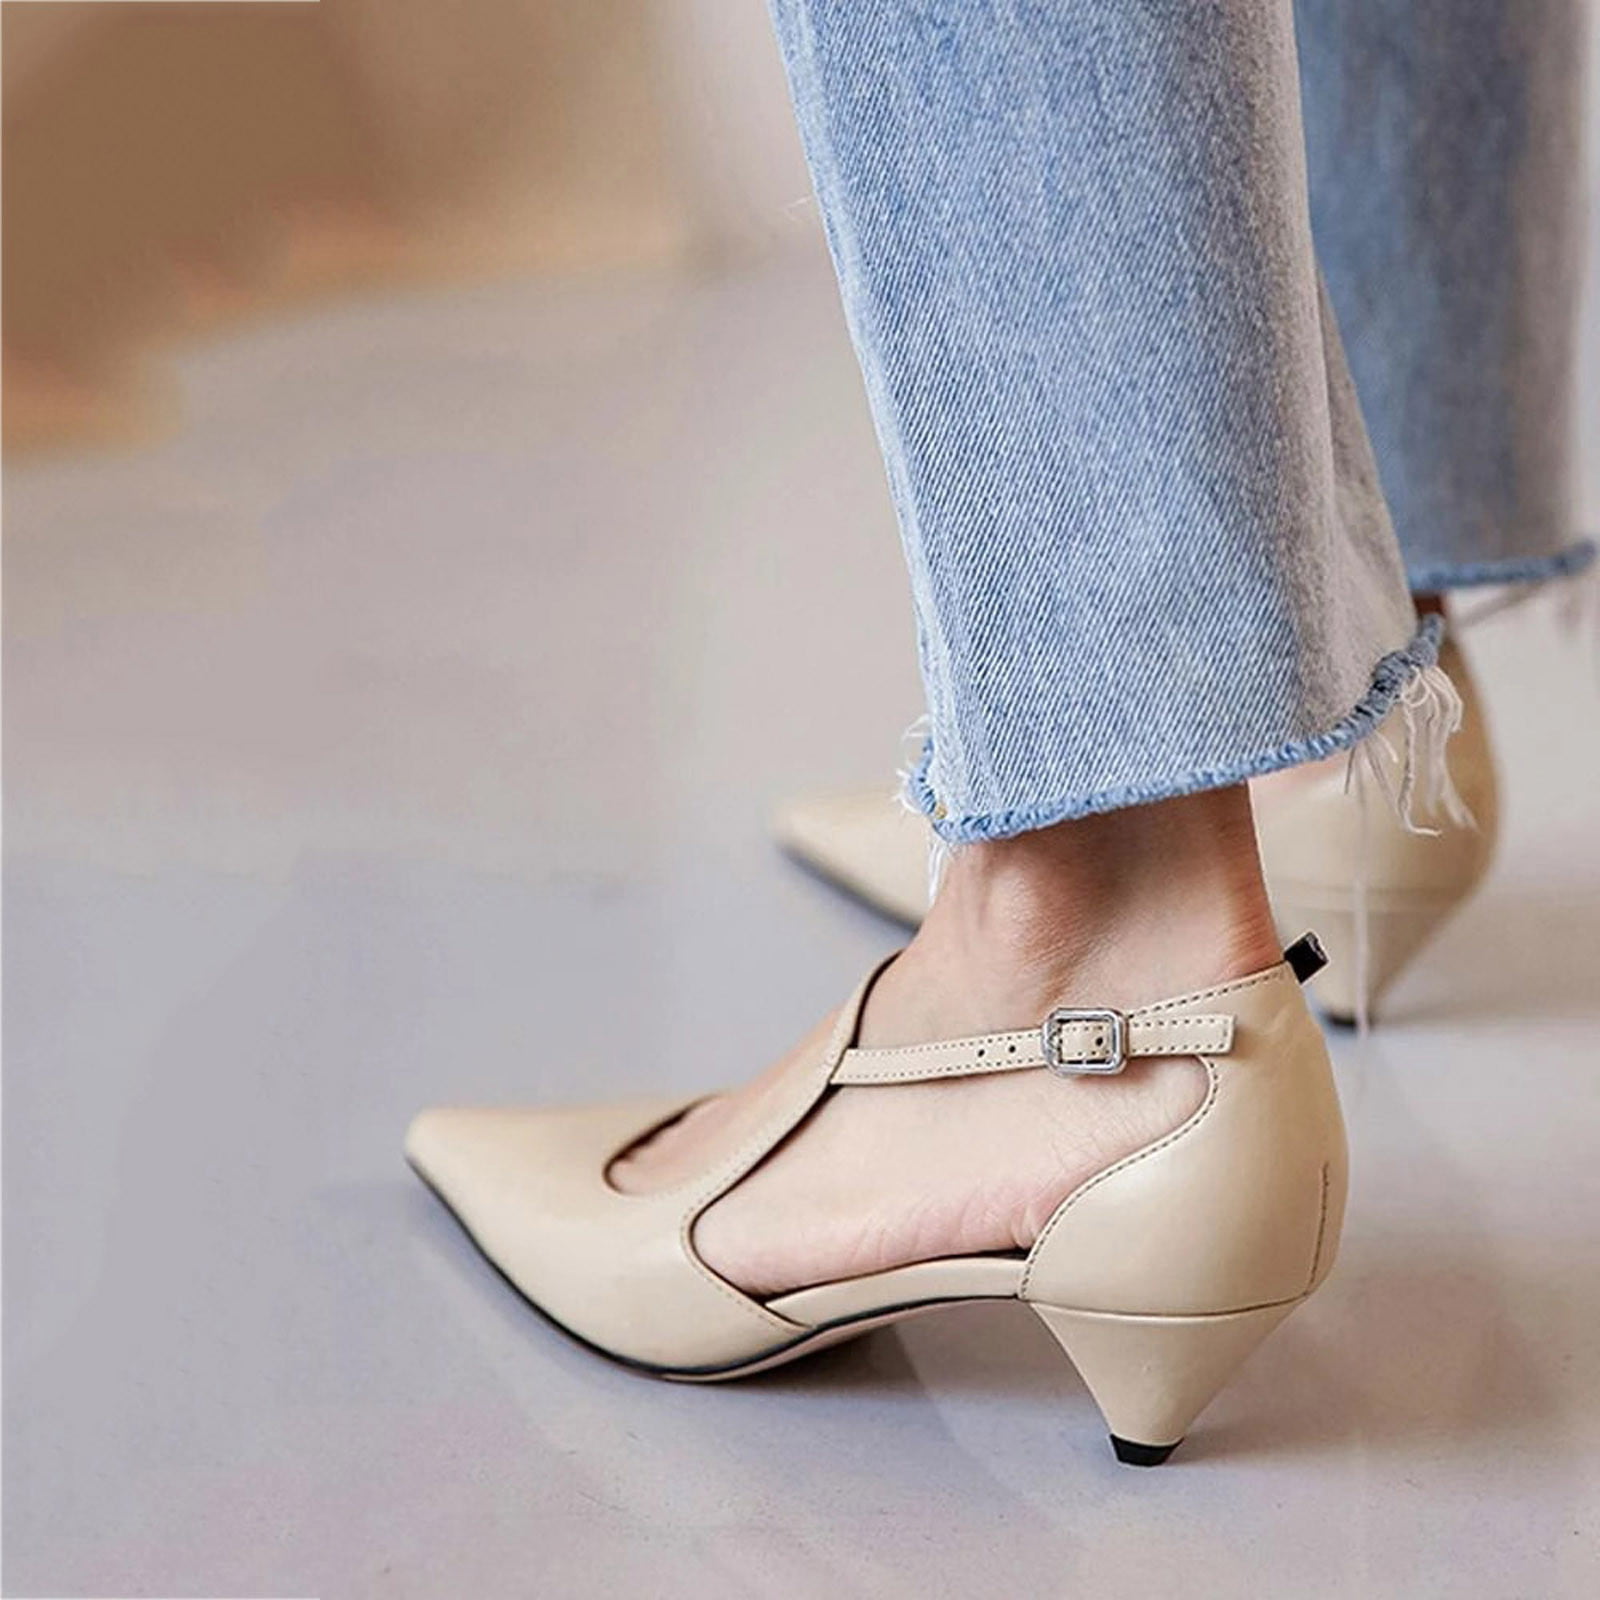 Classic cream-colored pumps handmade of natural leather with a geometric  heel - BRAVOMODA